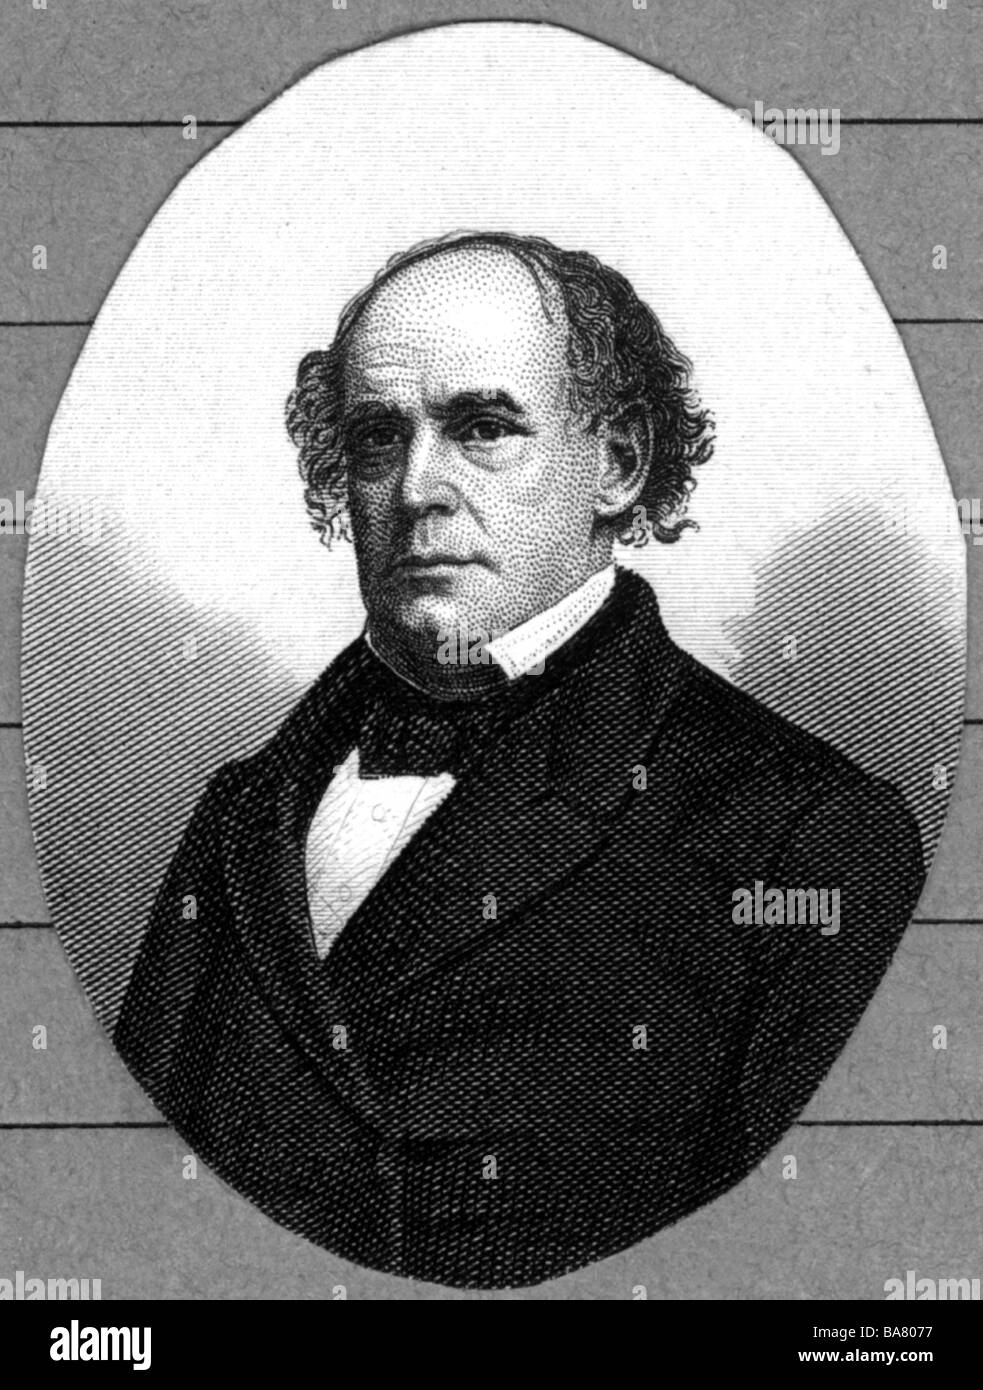 Chase, Salmon P., 13.1.1808 - 7.5.1873, American politician (Rep.), Secretary of the Treasury 1.7.1831 - 30.6.1864, portrait, steel engraving, 19th century, , Artist's Copyright has not to be cleared Stock Photo